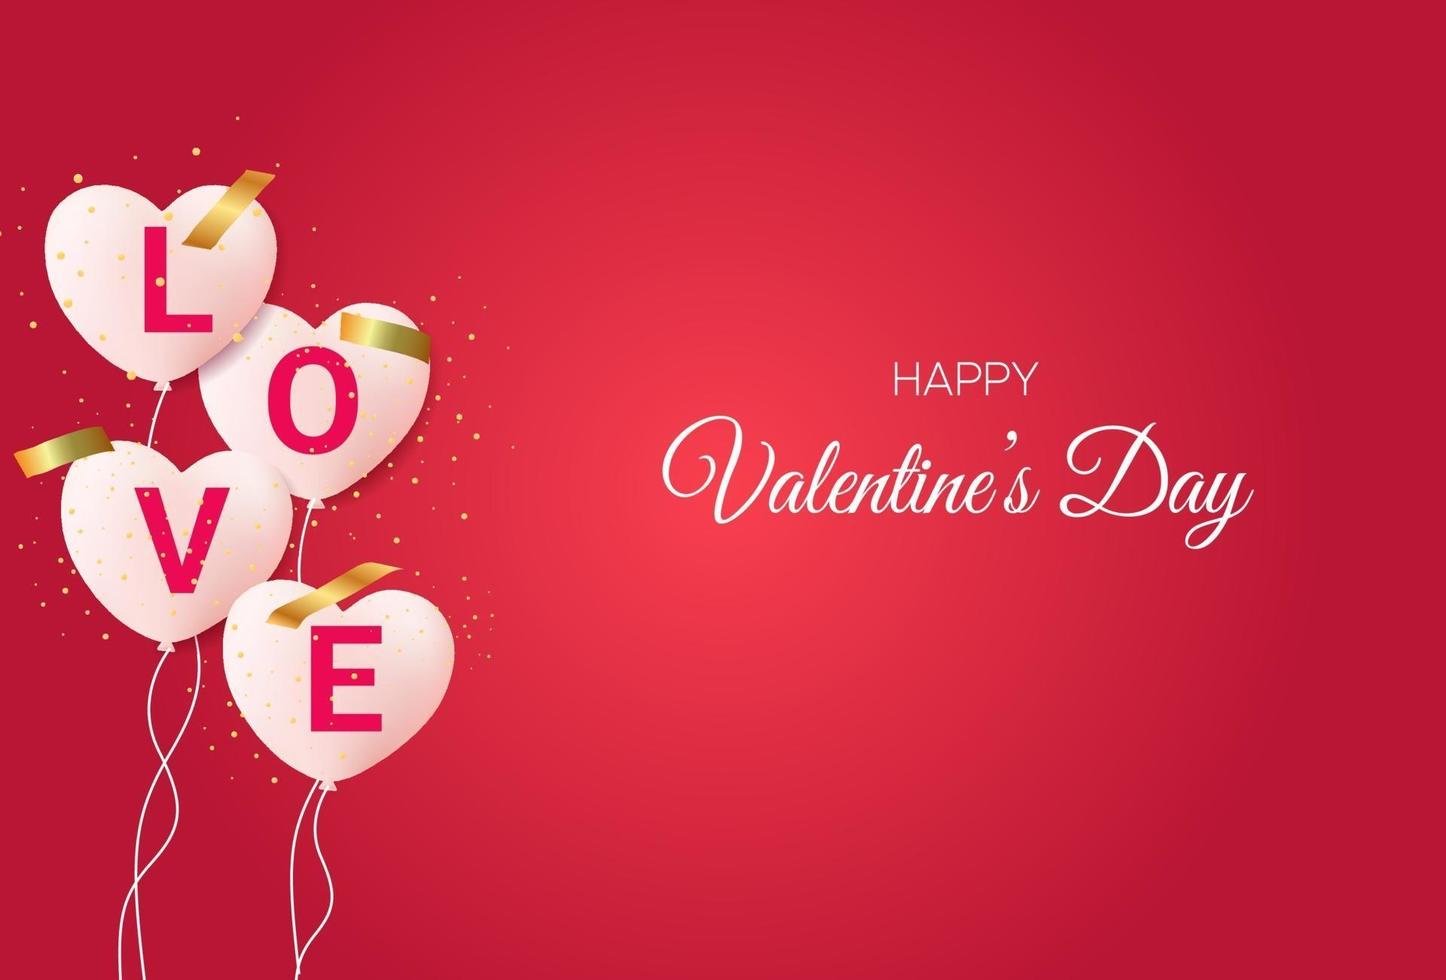 Beautiful valentine's day background with love balloons and text vector